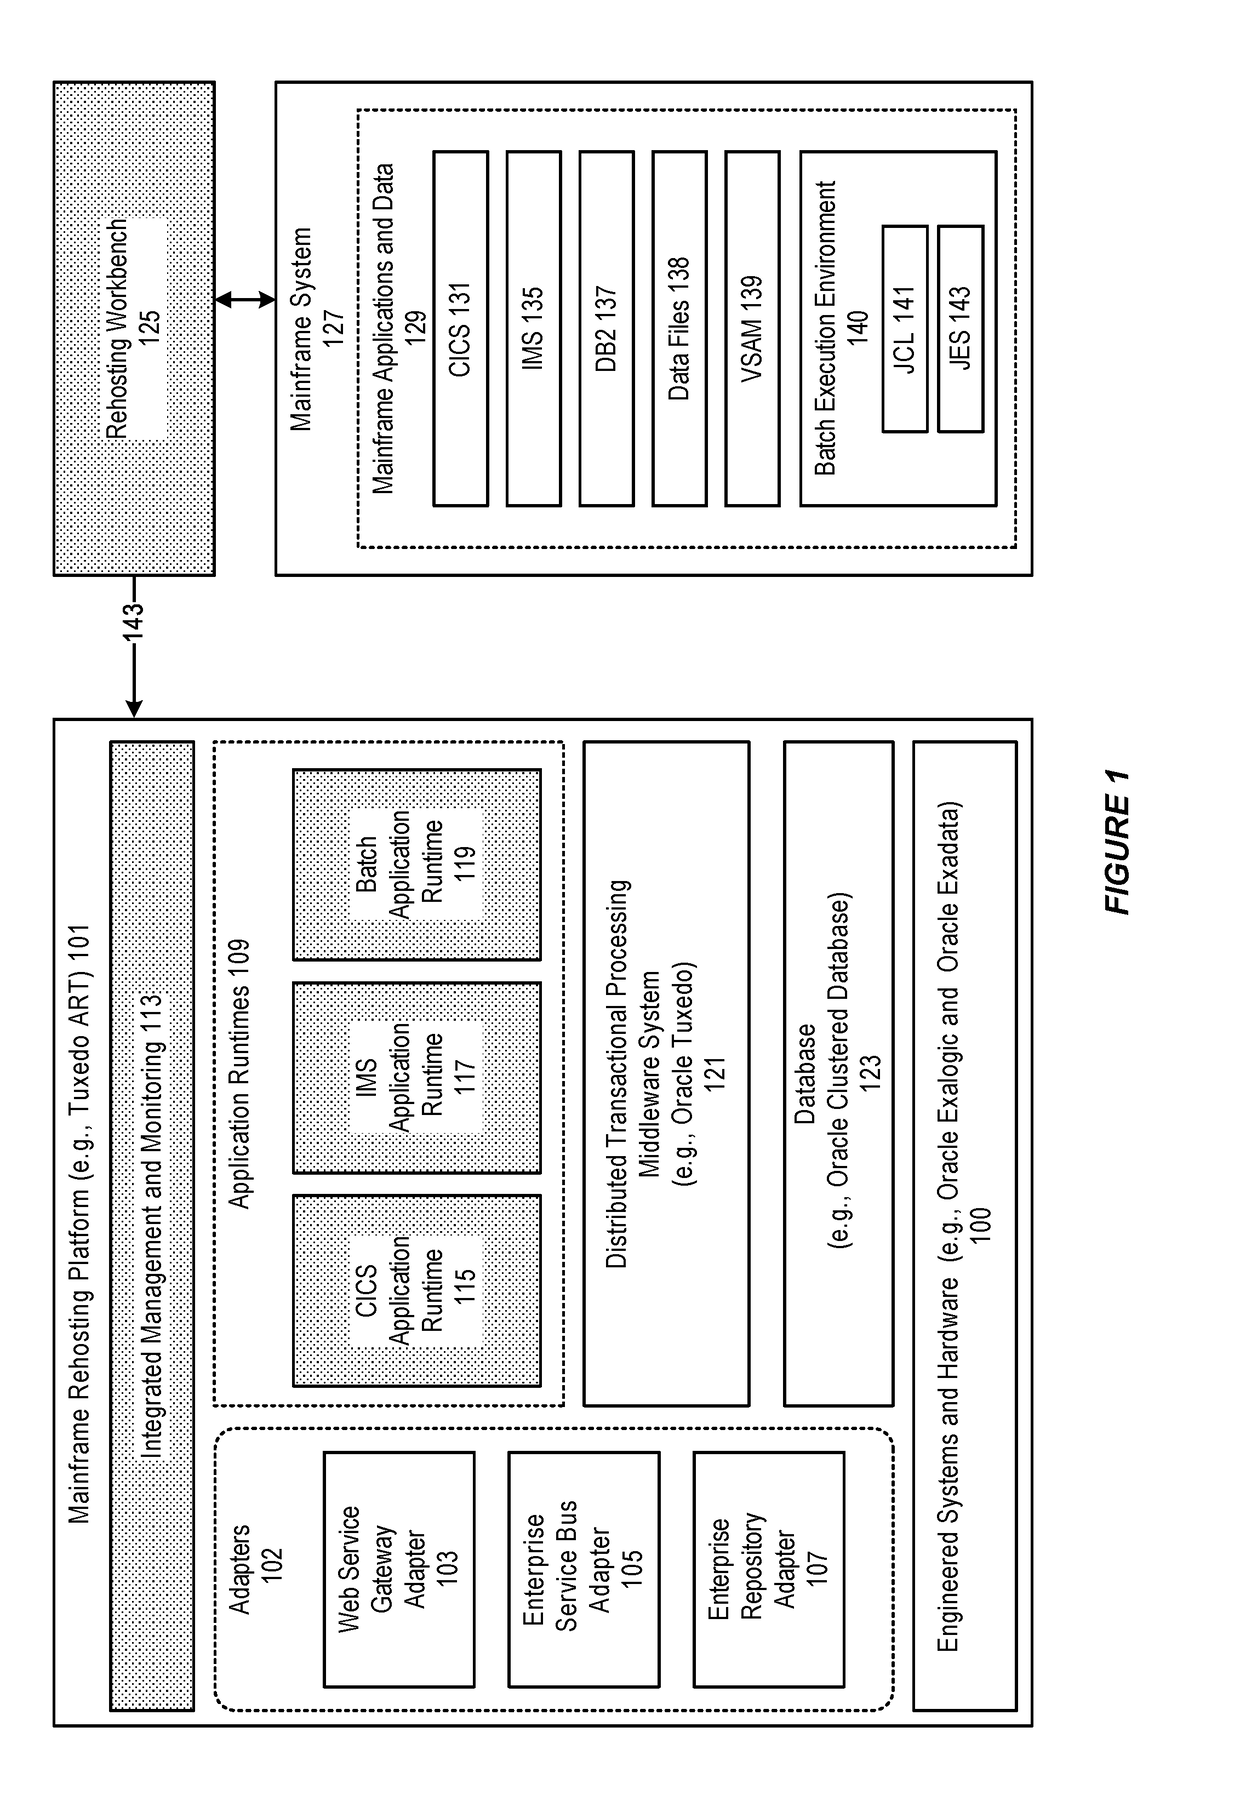 System and method for dynamic conversion of database accessing scripts during runtime in a mainframe rehosting platform